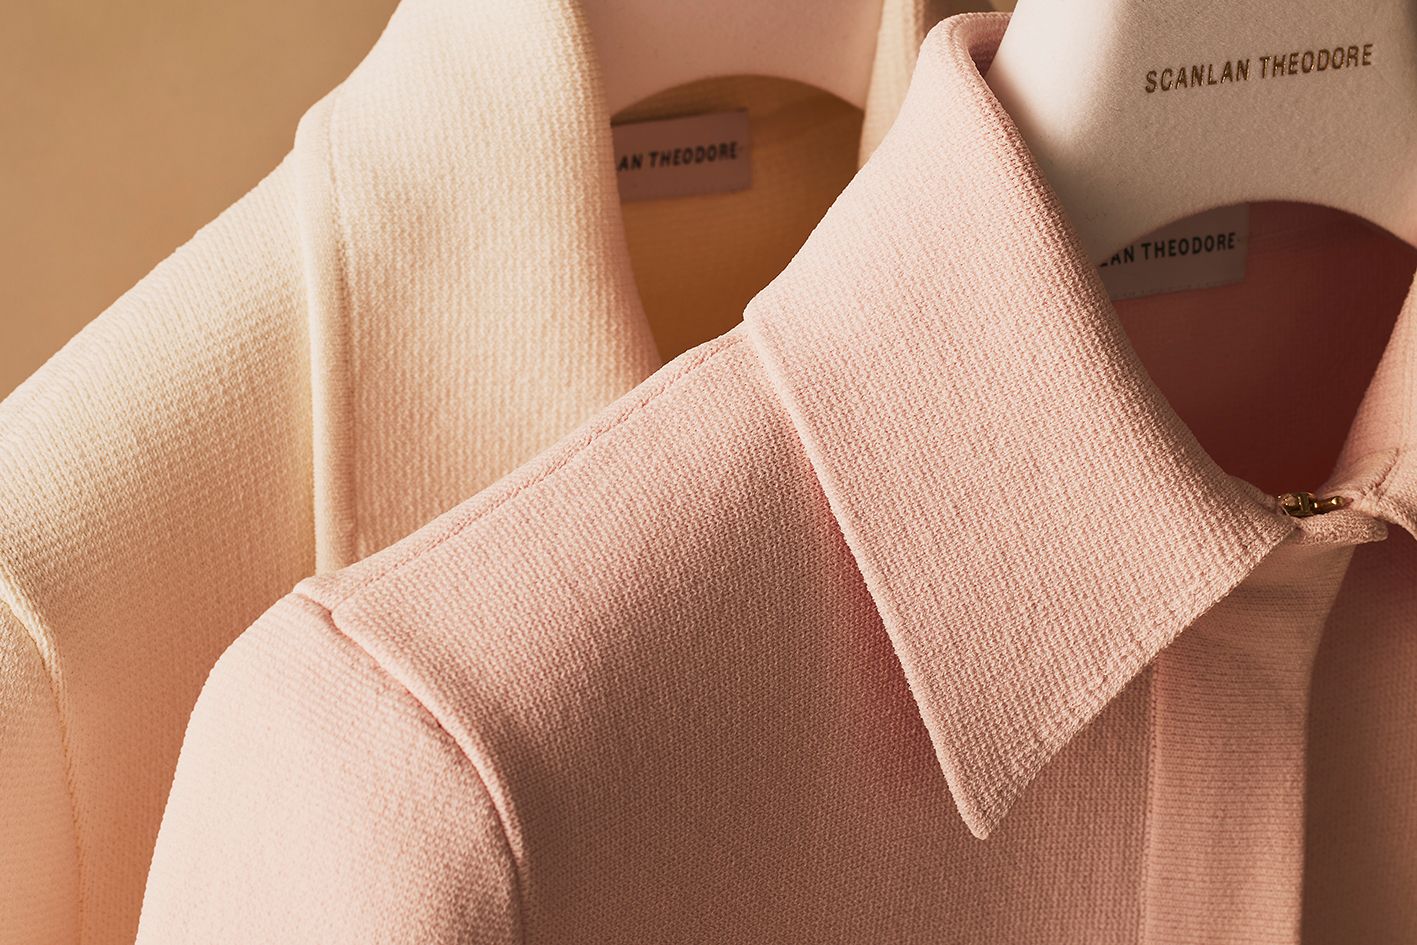 Scanlan Theodore crepe knit in light pink and cream with close detailed view of collar.